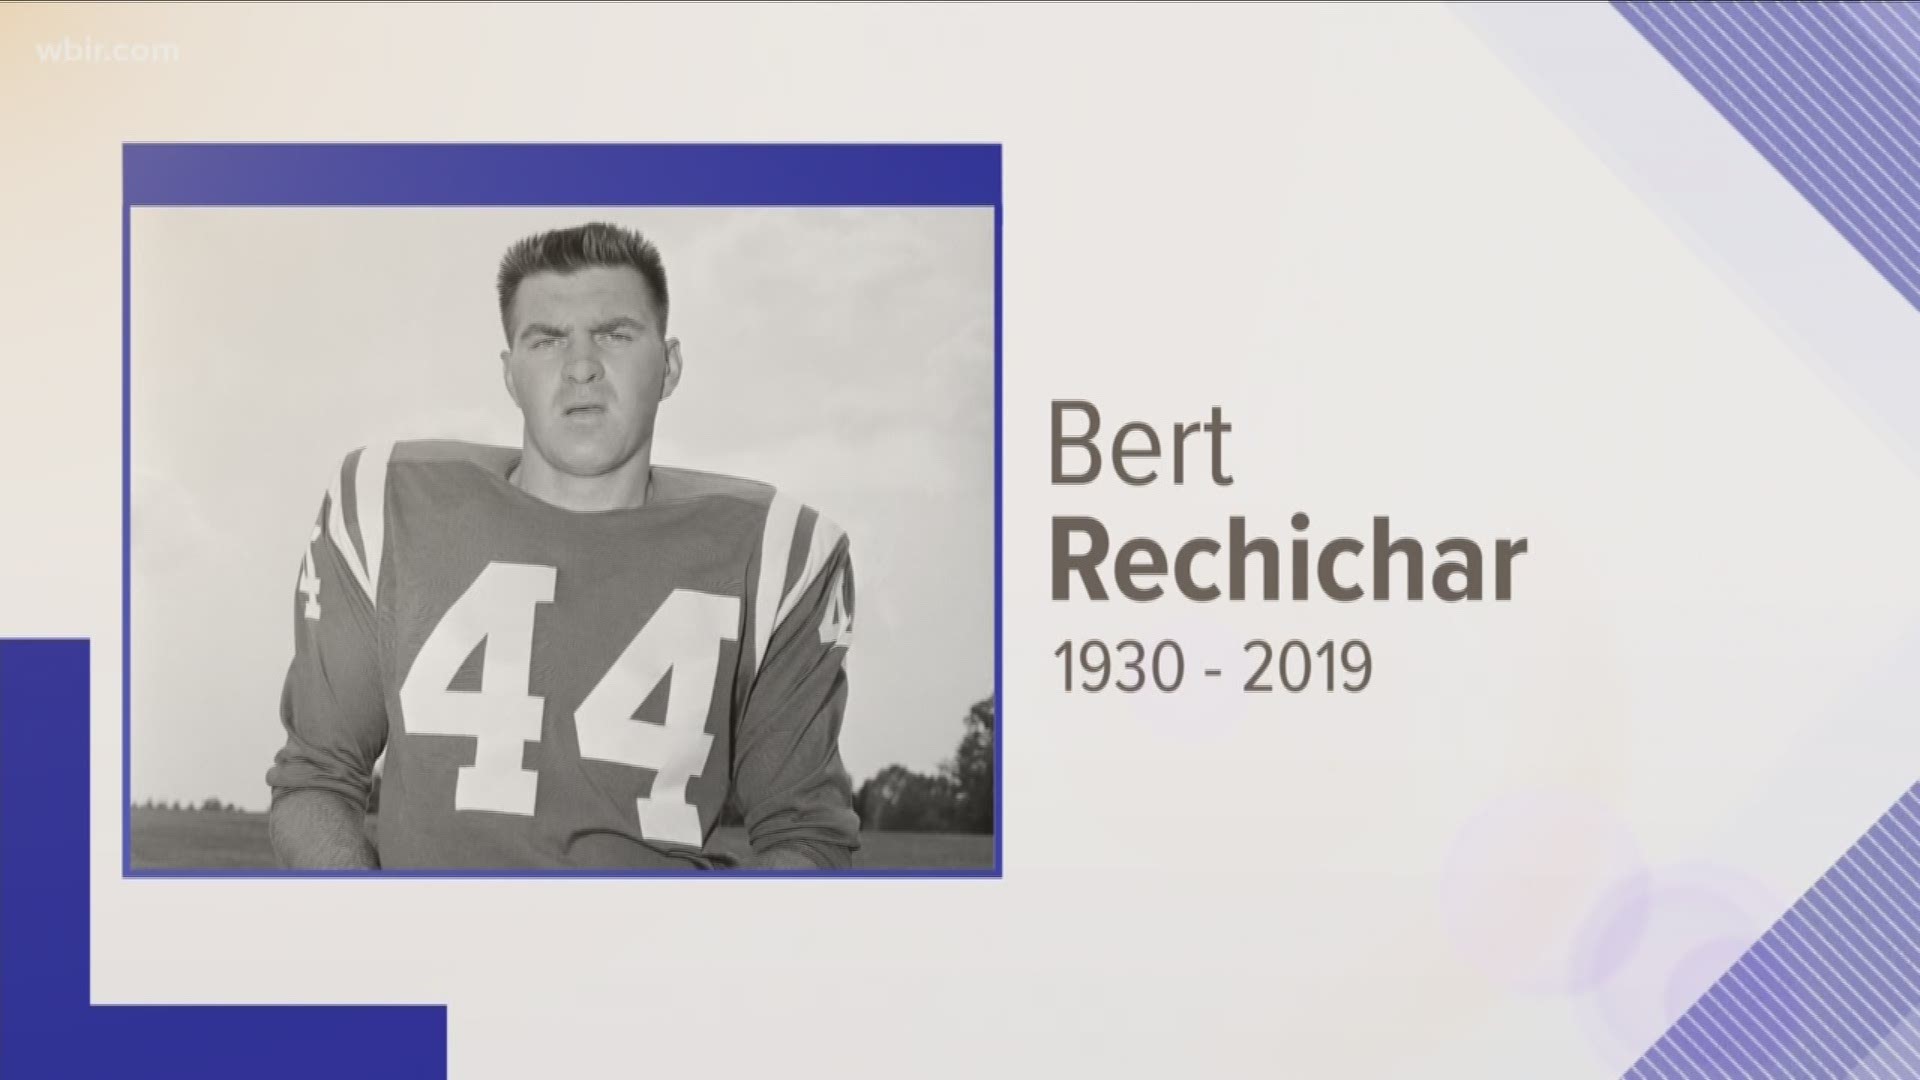 The champion defensive back and kicker celebrated two NFL championships in 1958 and 1959 with the Baltimore Colts and three Pro Bowl appearances.